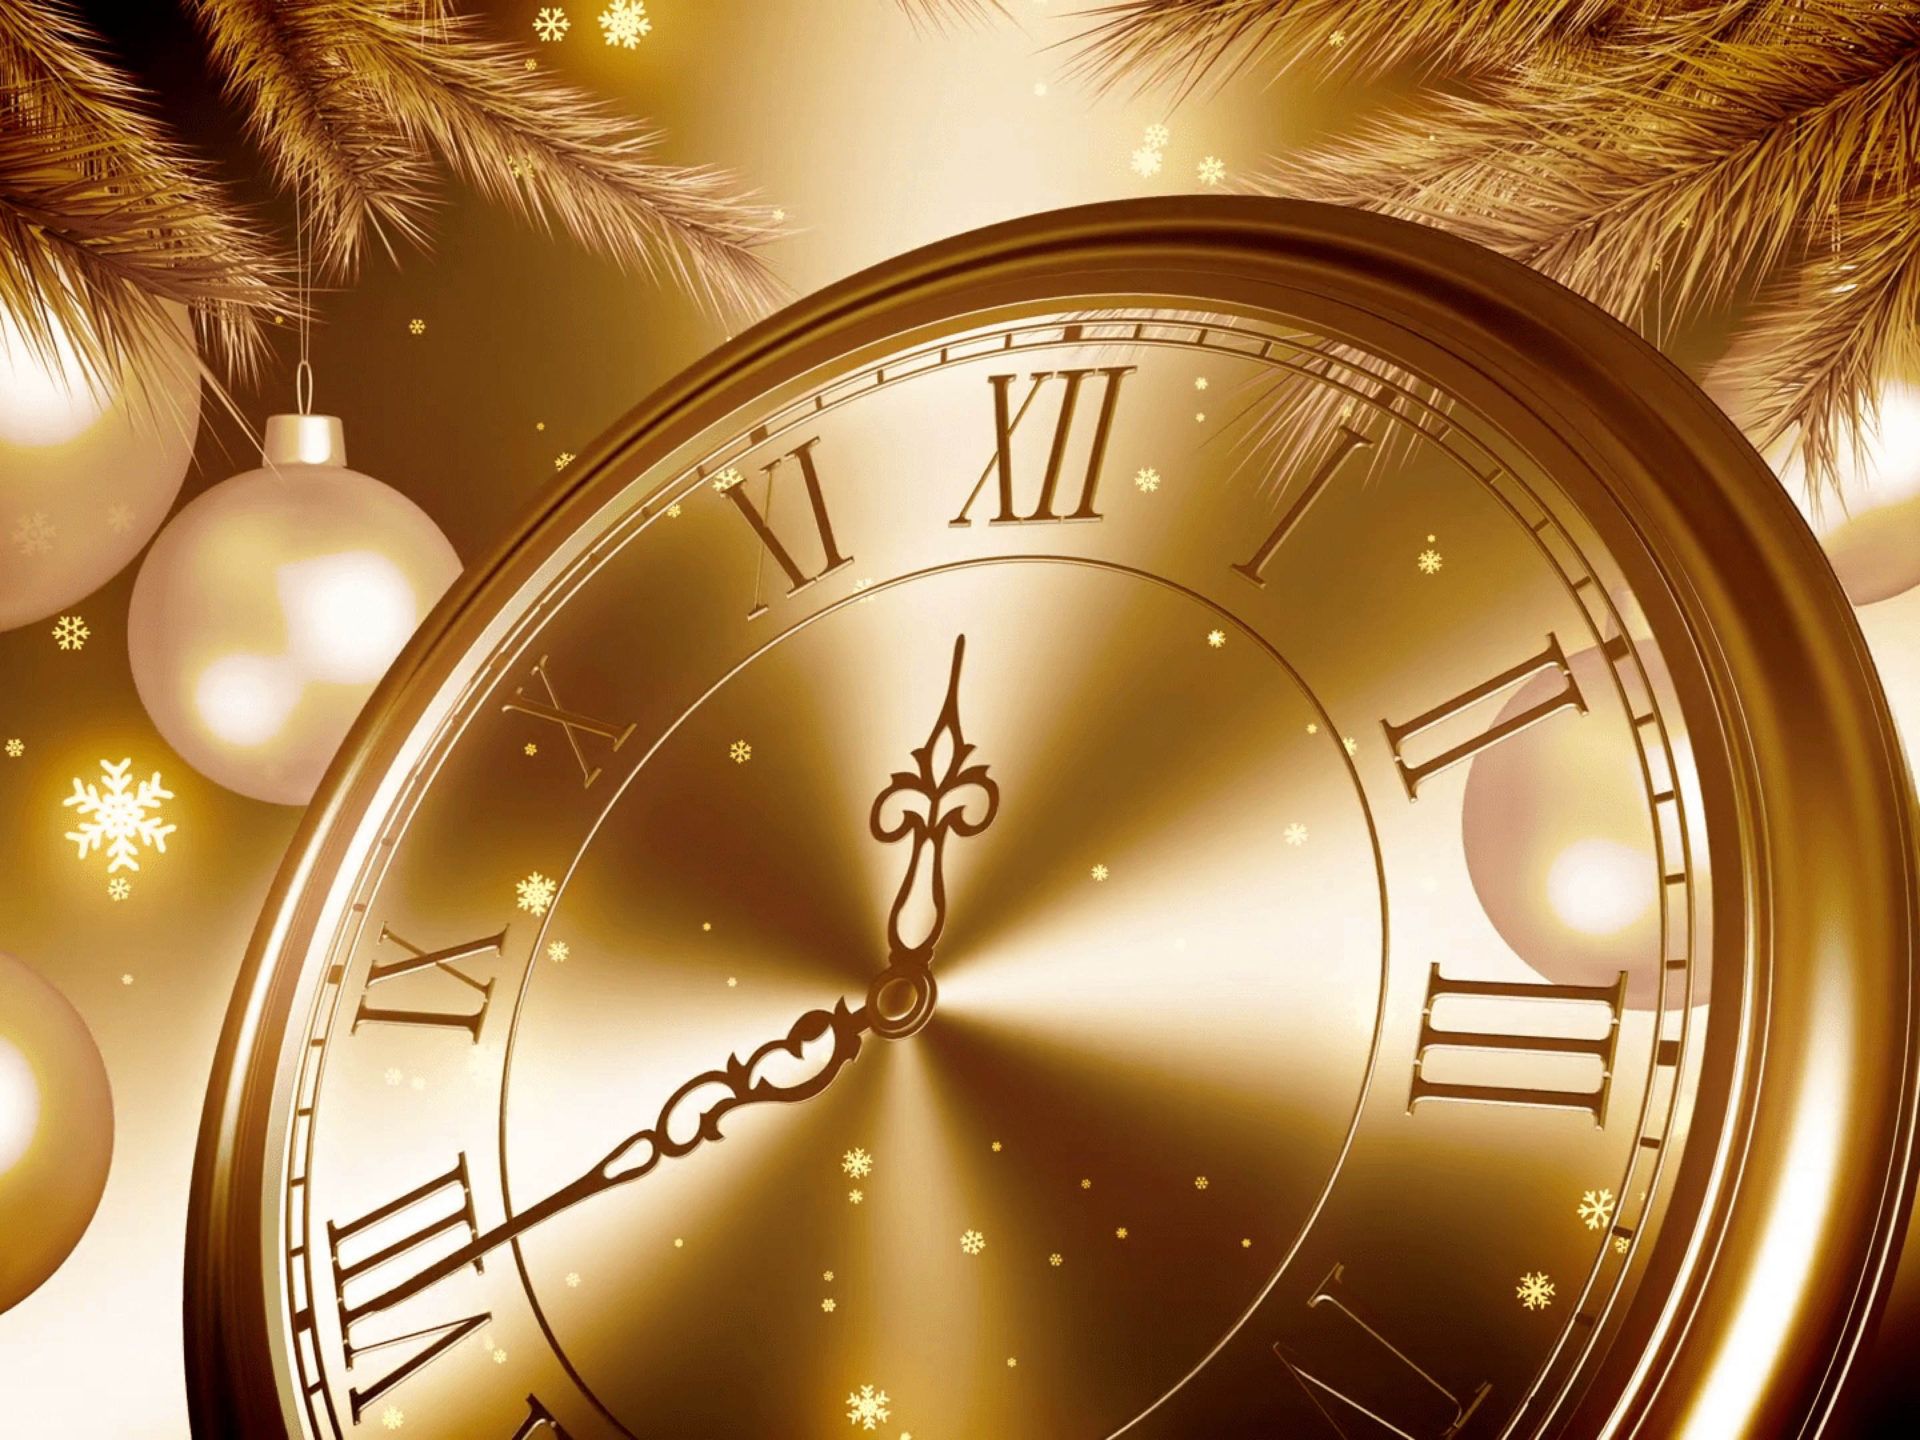 Happy New Year 2021 Golden Clock Countdown In New Year's Eve Desktop Wallpaper For Computers Laptop Tablet And Mobile Phones, Wallpaper13.com